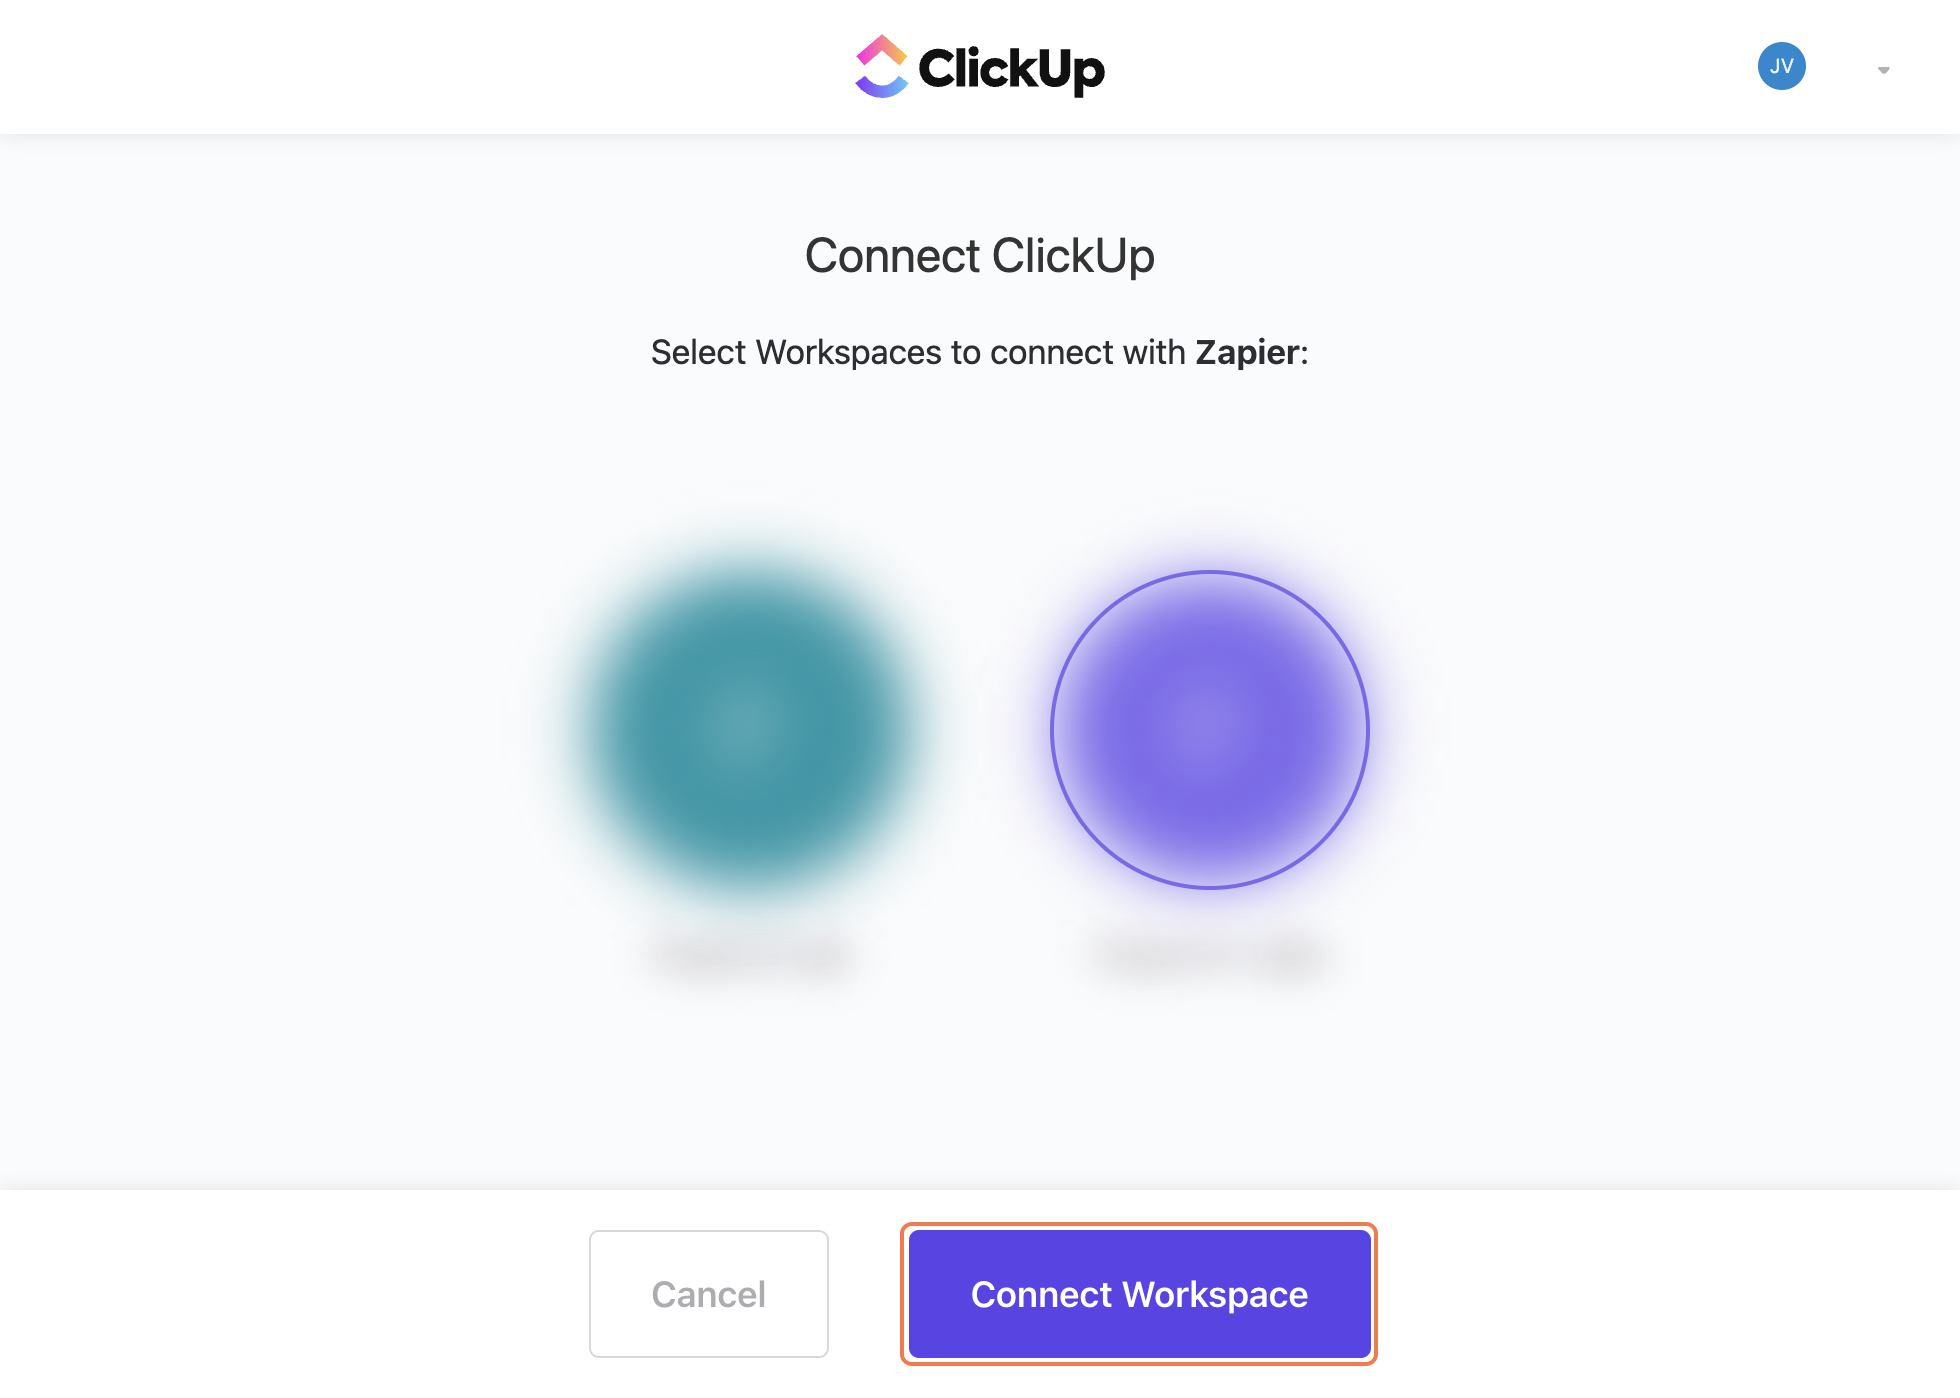 Click on Connect Workspace